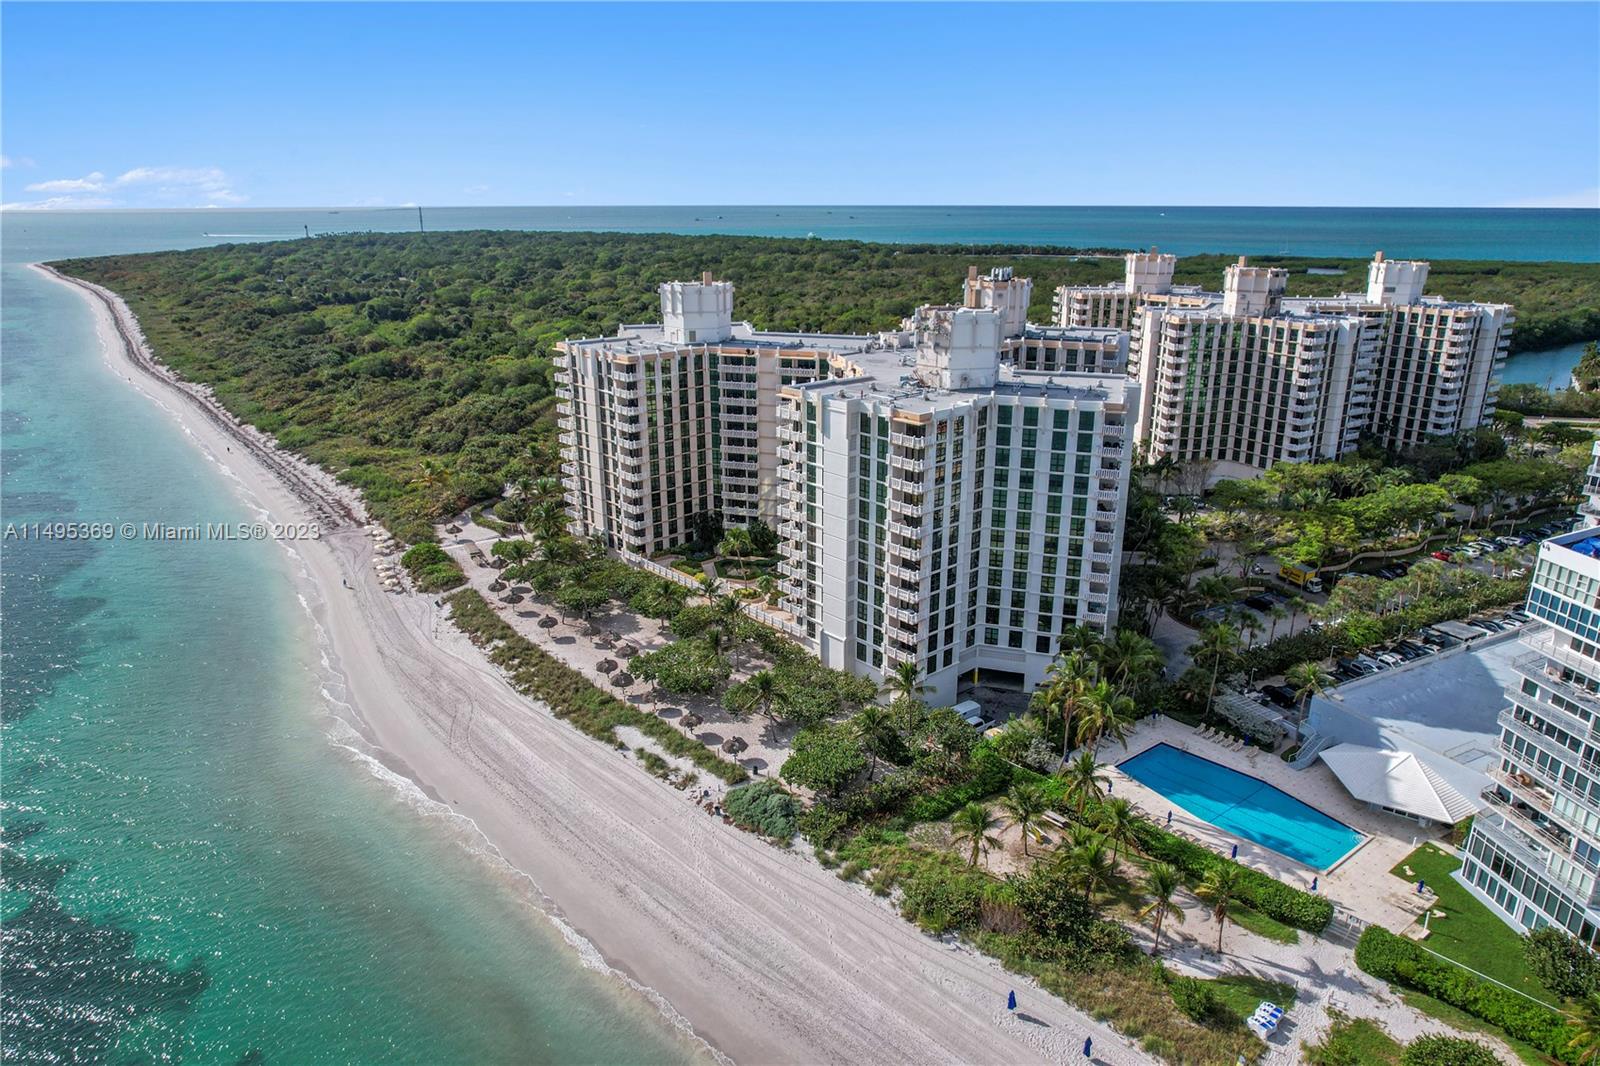 Beautiful 2 Bedroom / 2 Bath, 1409 Sqft unit at The Towers Of Key Biscayne. North East Ocean and Bay views from spacious balcony. The Towers offers Tennis Courts, 2 Pools, Picnic/BBQ areas, Access to pristine Beach, Hair salon, On-Site Restaurant, Children's play area, and Fitness Center.